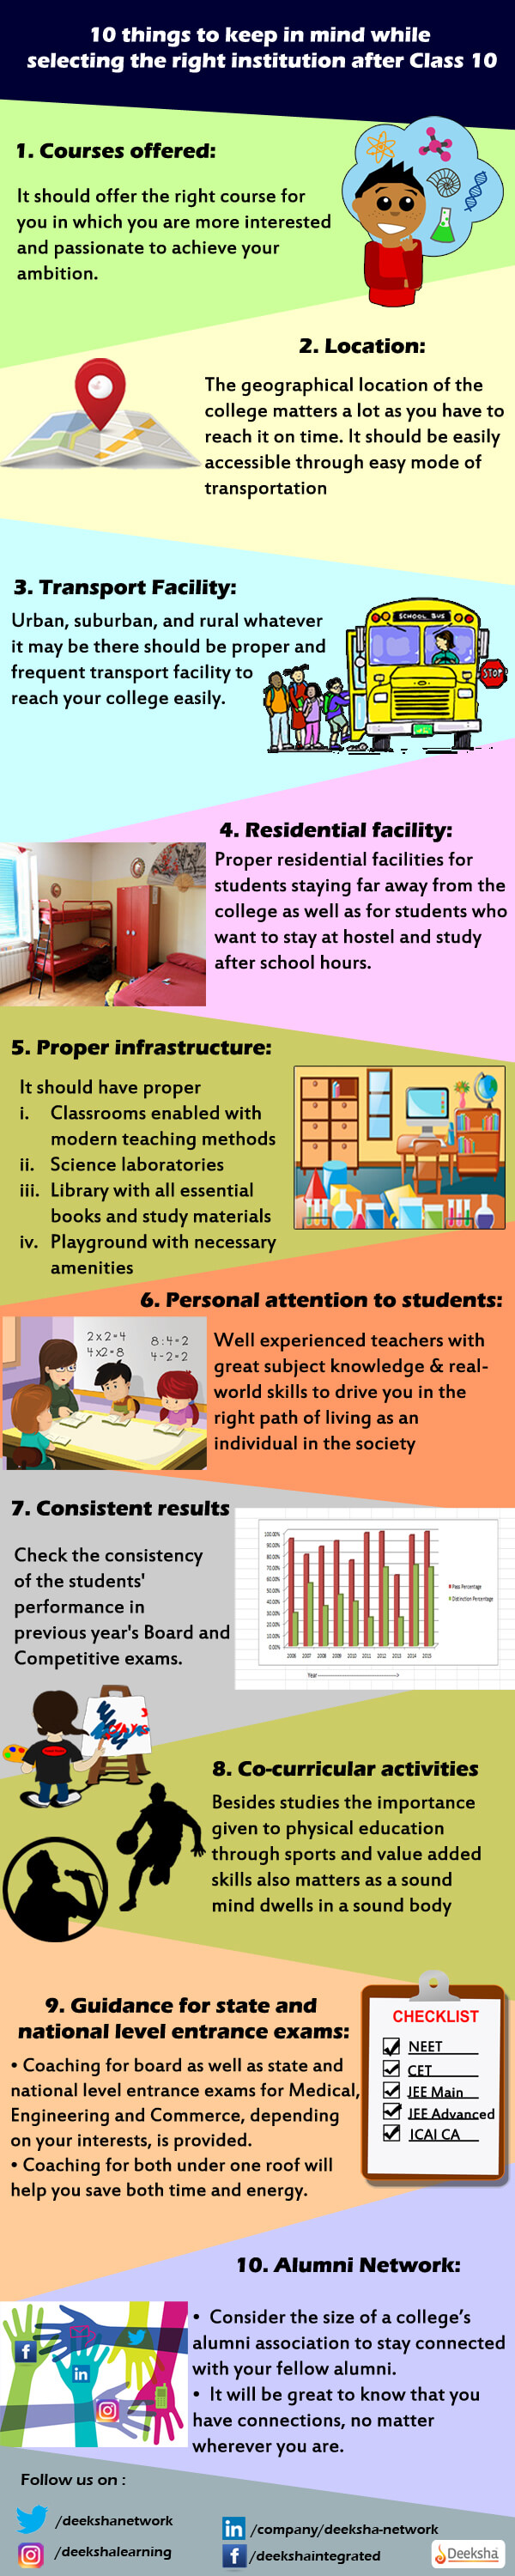 things-to-keep-in-mind-while-selecting-the-right-college-infographic-plaza